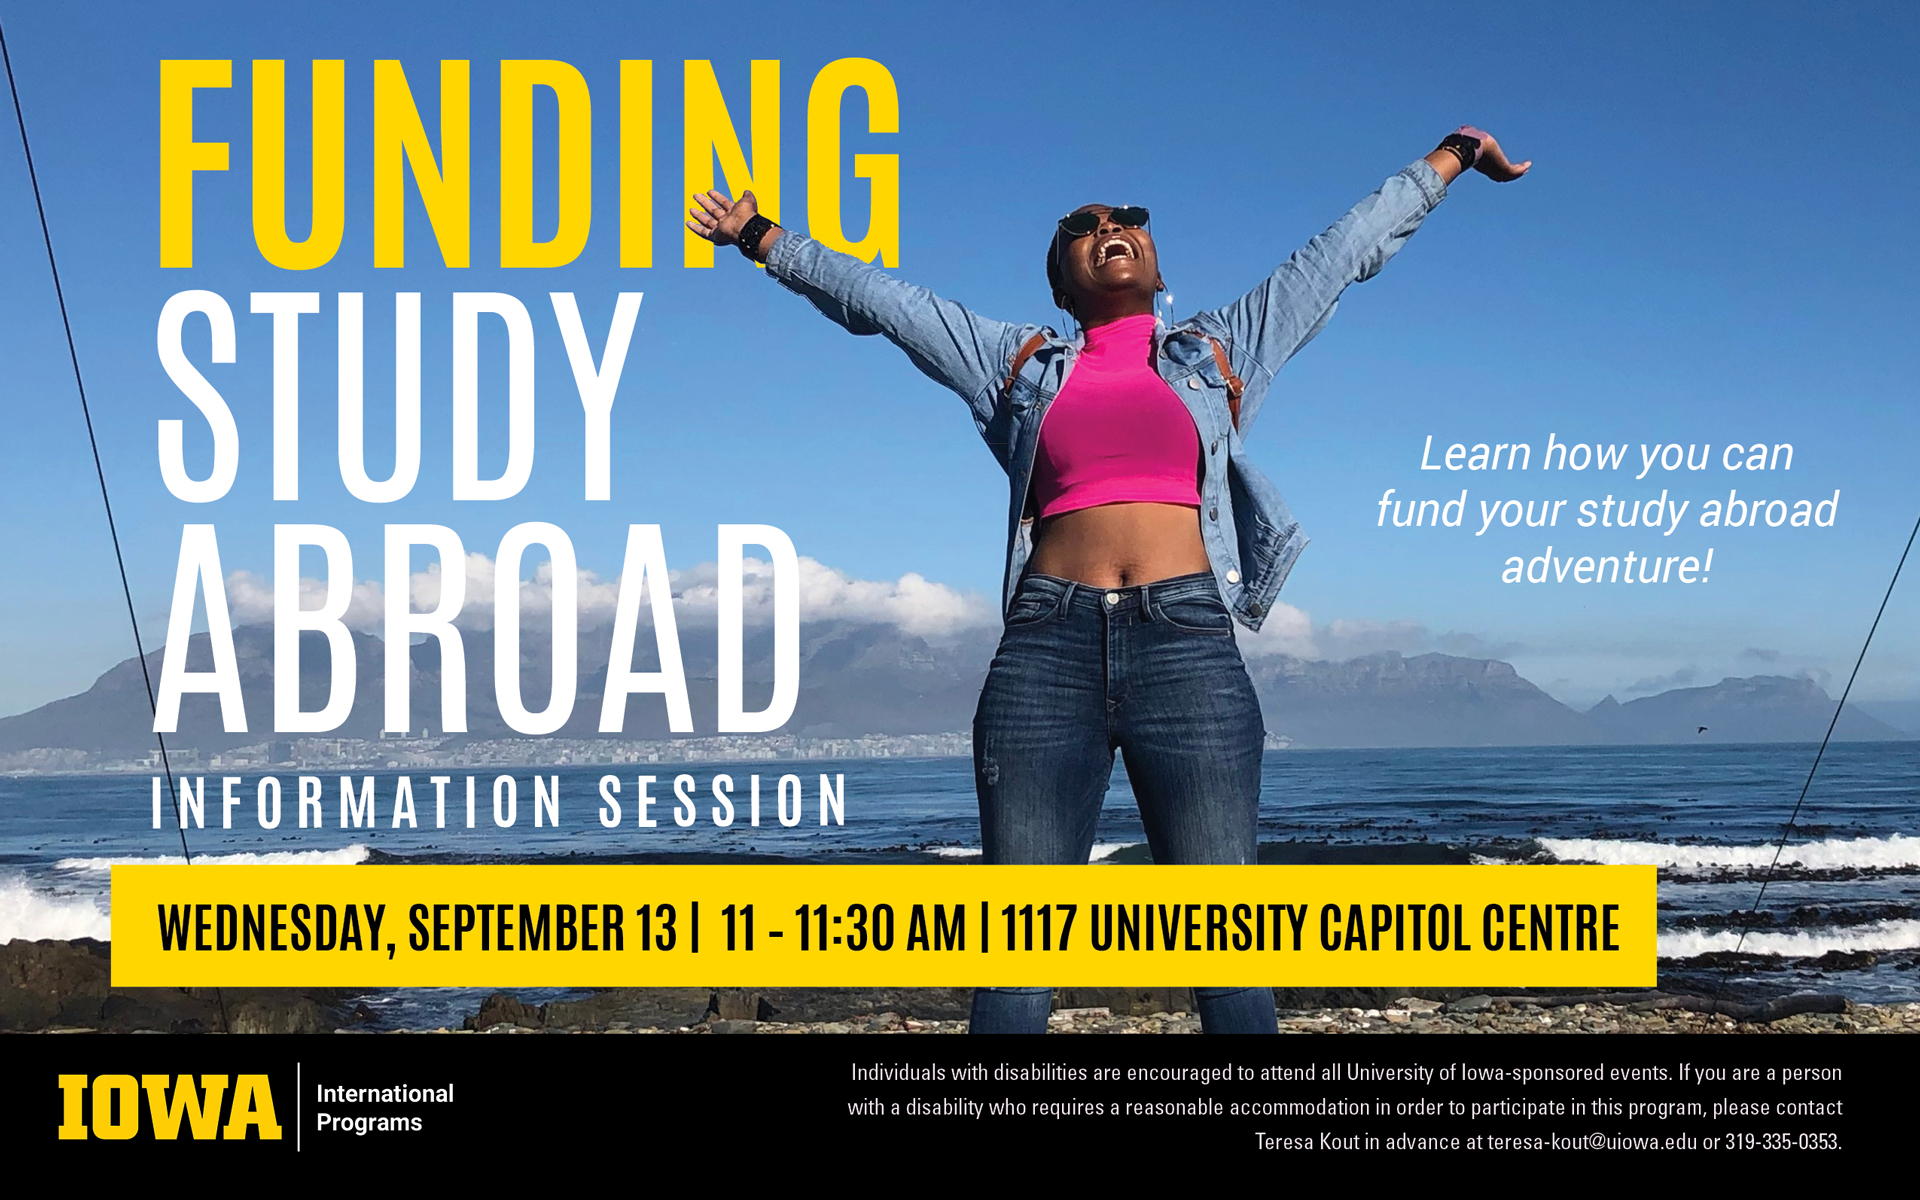 Funding Study Abroad Info Session: Wed. Sept. 13 11-11:30 a.m. at 1117 University Capitol Centre